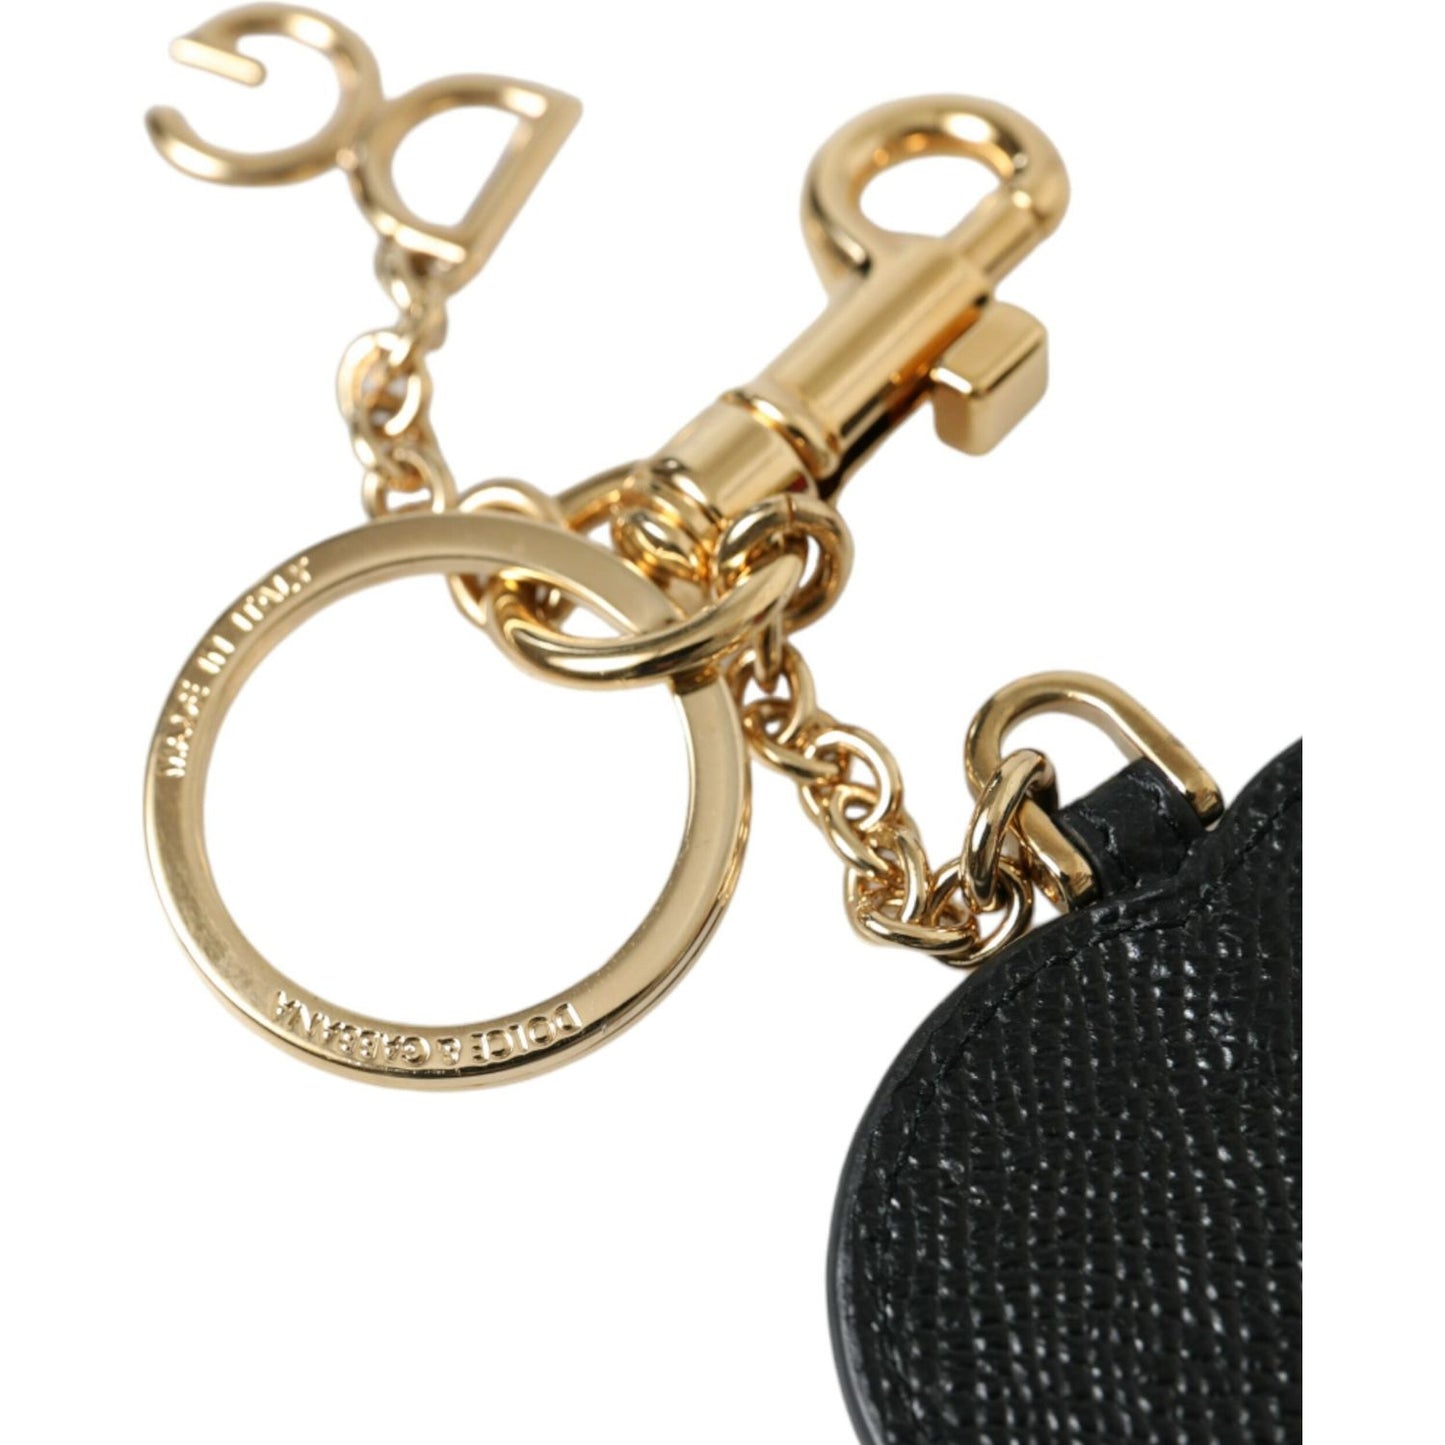 Dolce & Gabbana Stunning Gold and Pink Leather Keychain stunning-gold-and-pink-leather-keychain